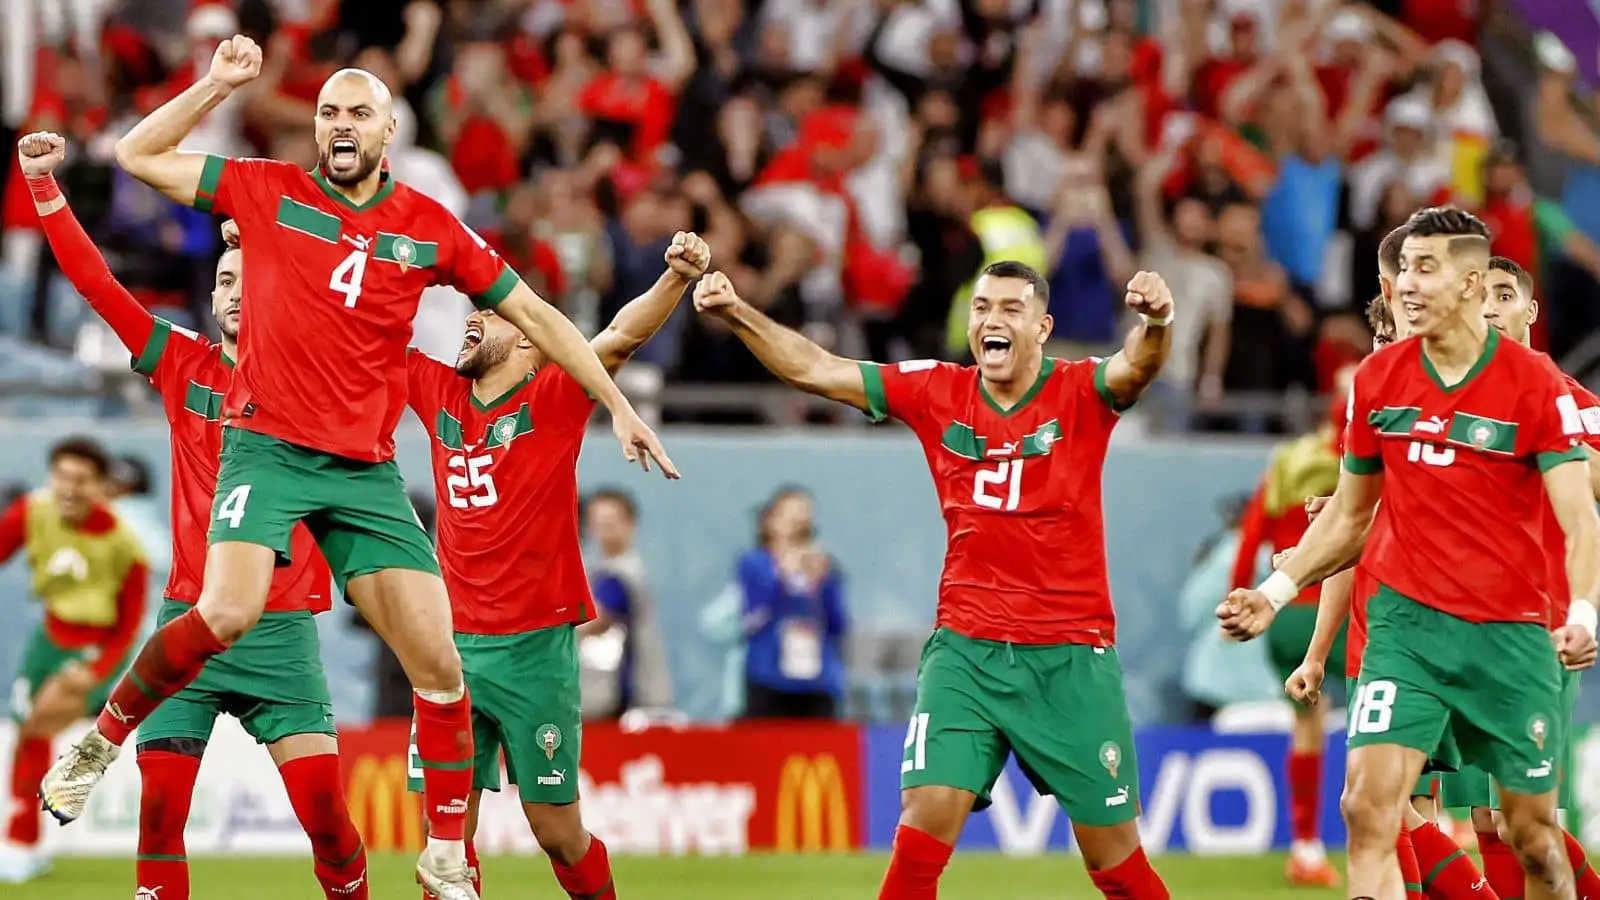 Sofyan Amrabat (4) Walid Cheddira (21) Jawed el Yamiq (18), Morocco players Stadium Education City, World Cup round of 16 between Morocco - Spain 0-0. Morocco wins after penalty kicks